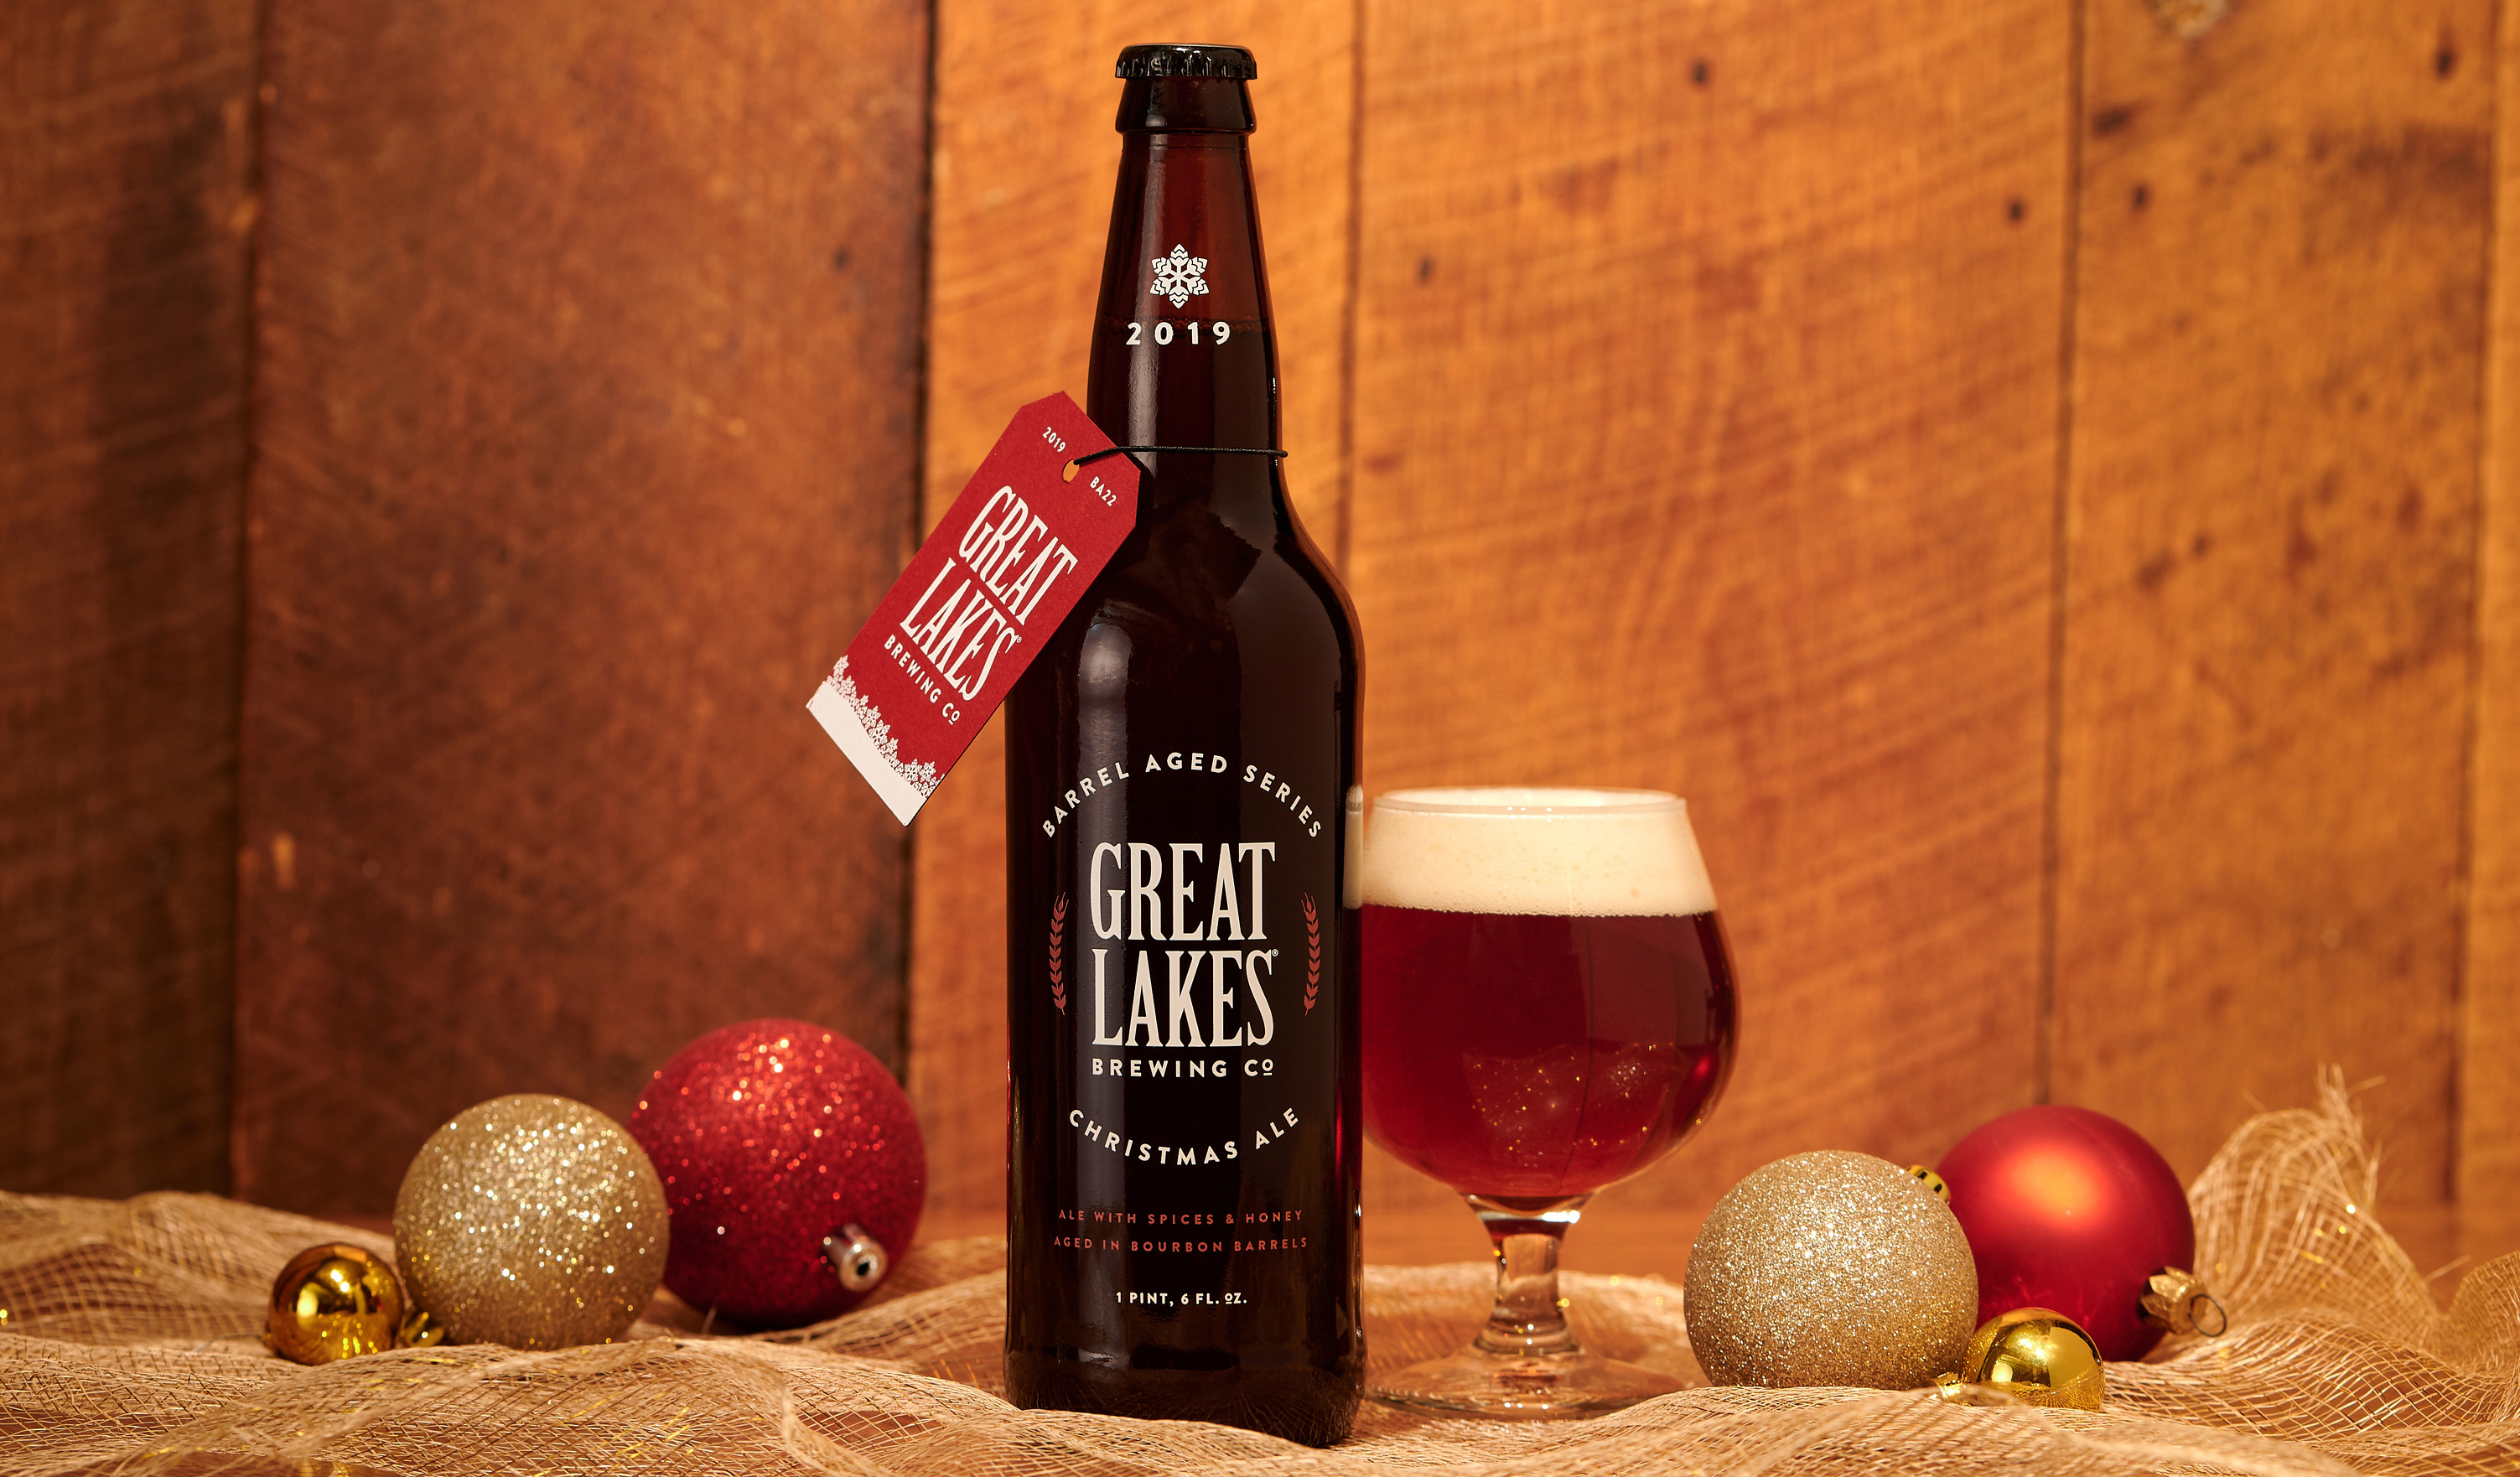 2019 Barrel Aged Christmas Ale Release Great Lakes Brewing Company